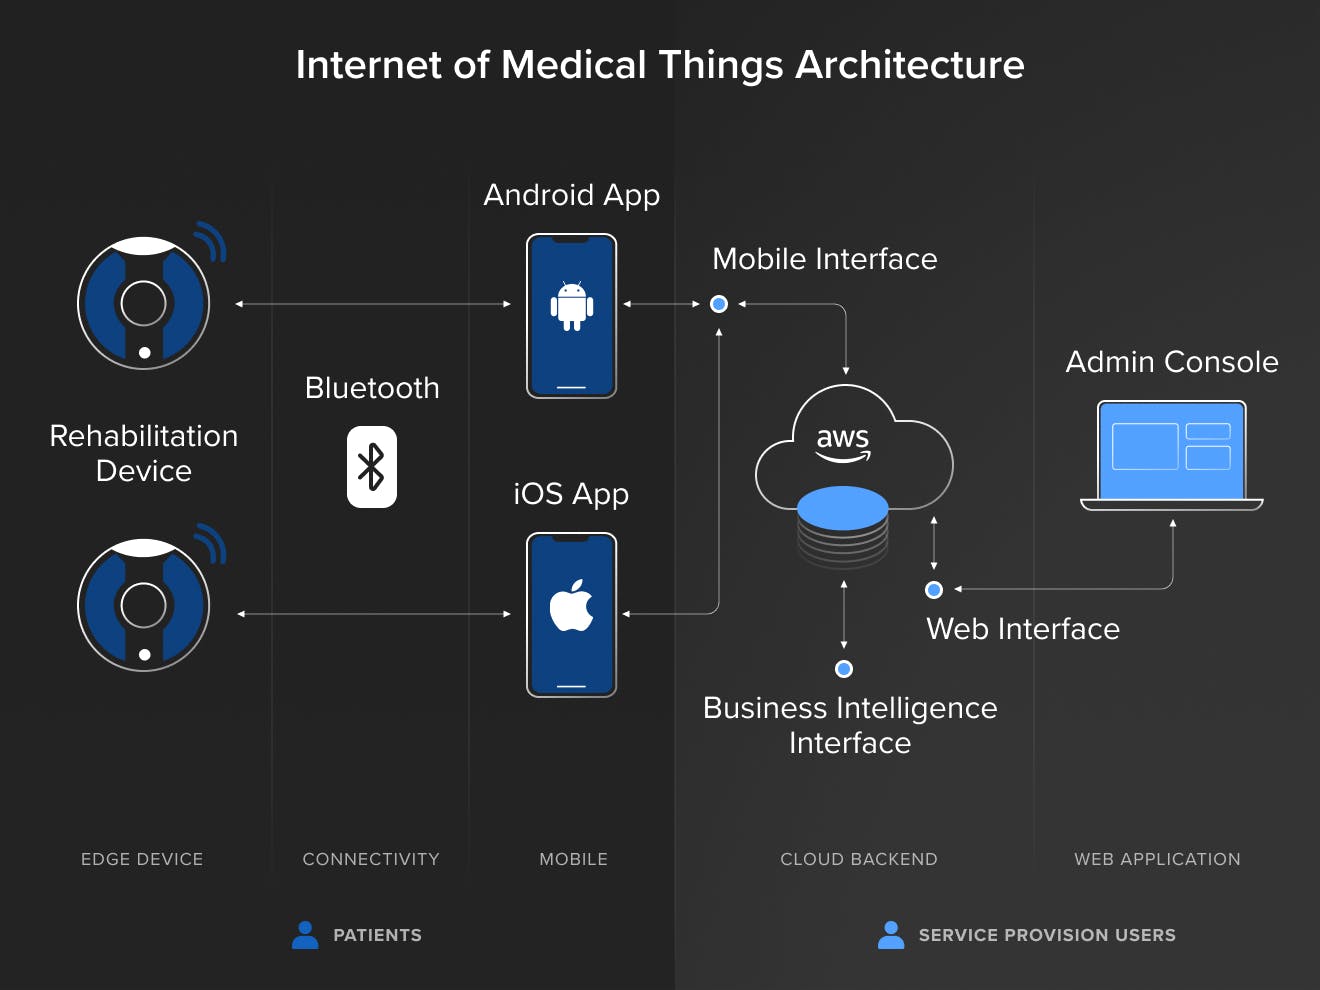 Internet of Medical Things Architecture